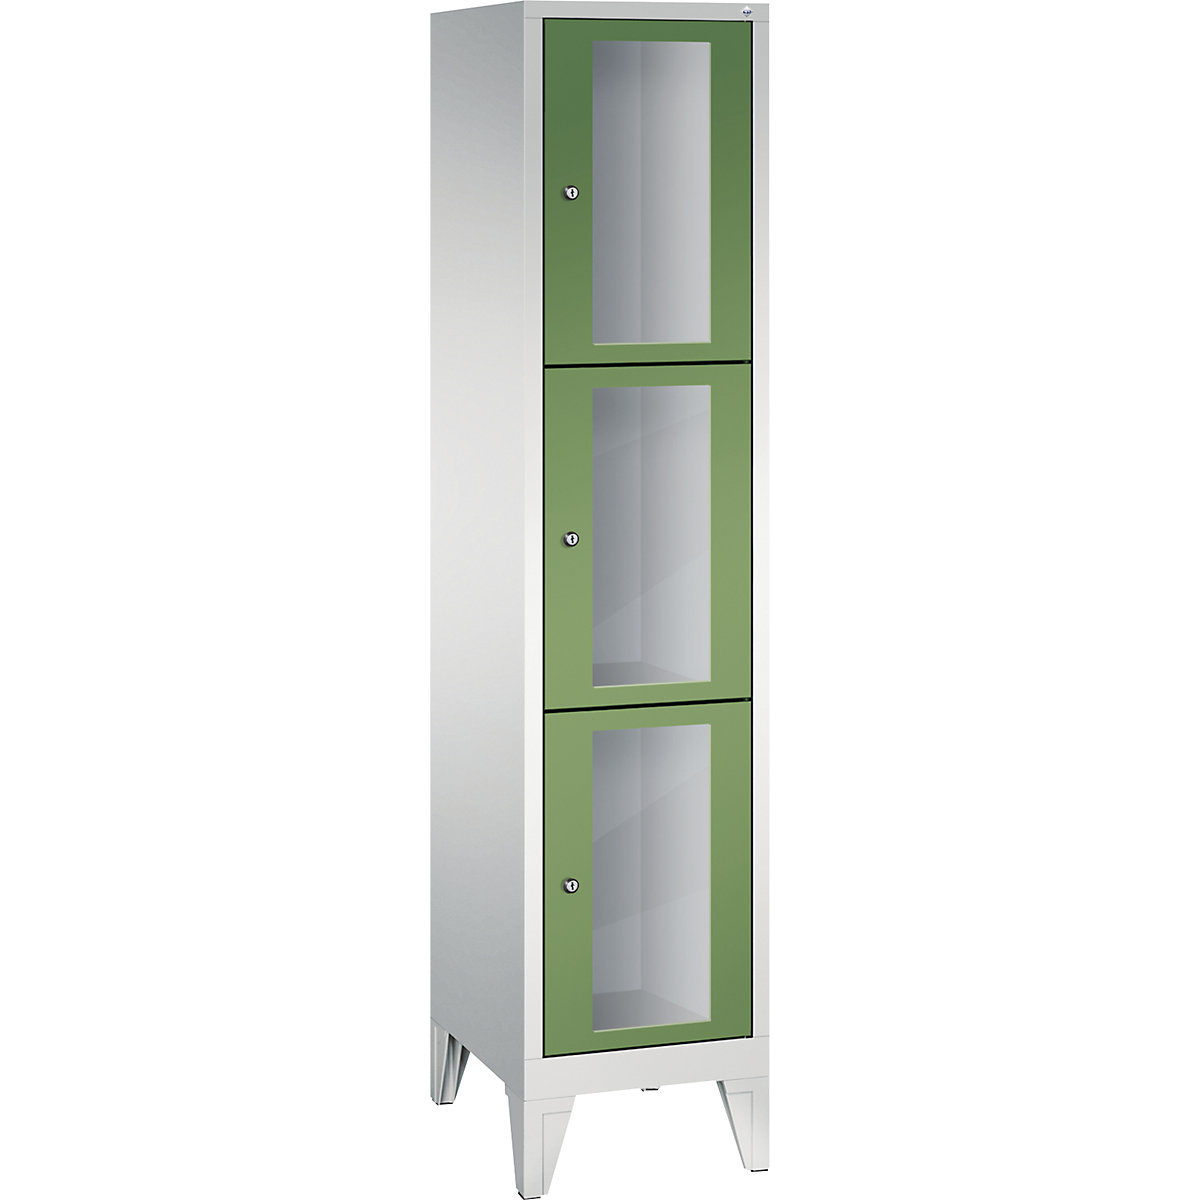 CLASSIC locker unit, compartment height 510 mm, with feet – C+P, 3 compartments, width 420 mm, reseda green door-5